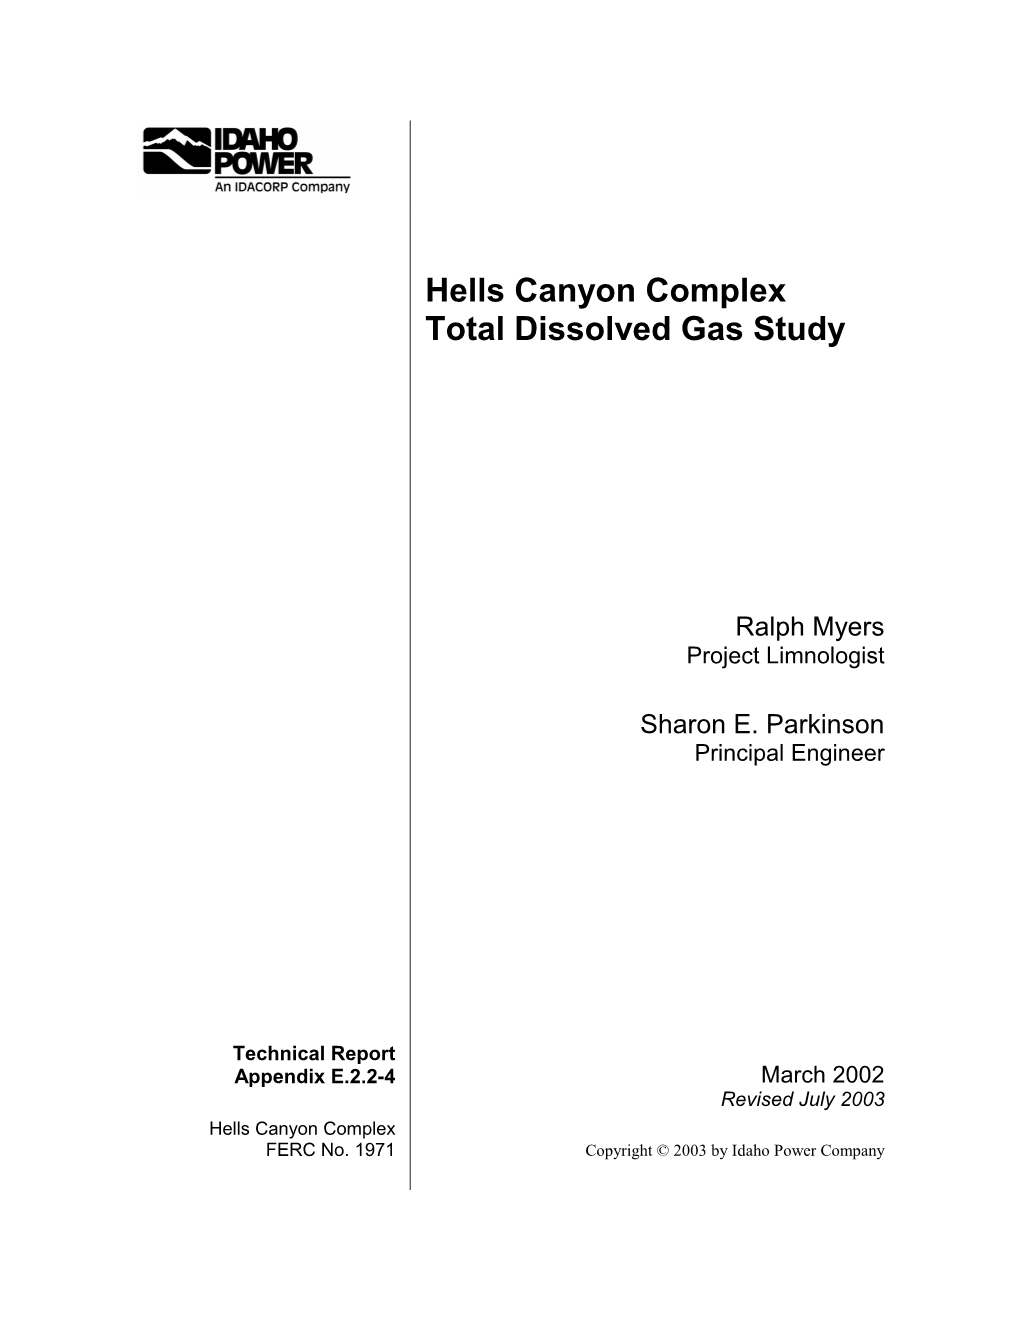 Hells Canyon Complex Total Dissolved Gas Study